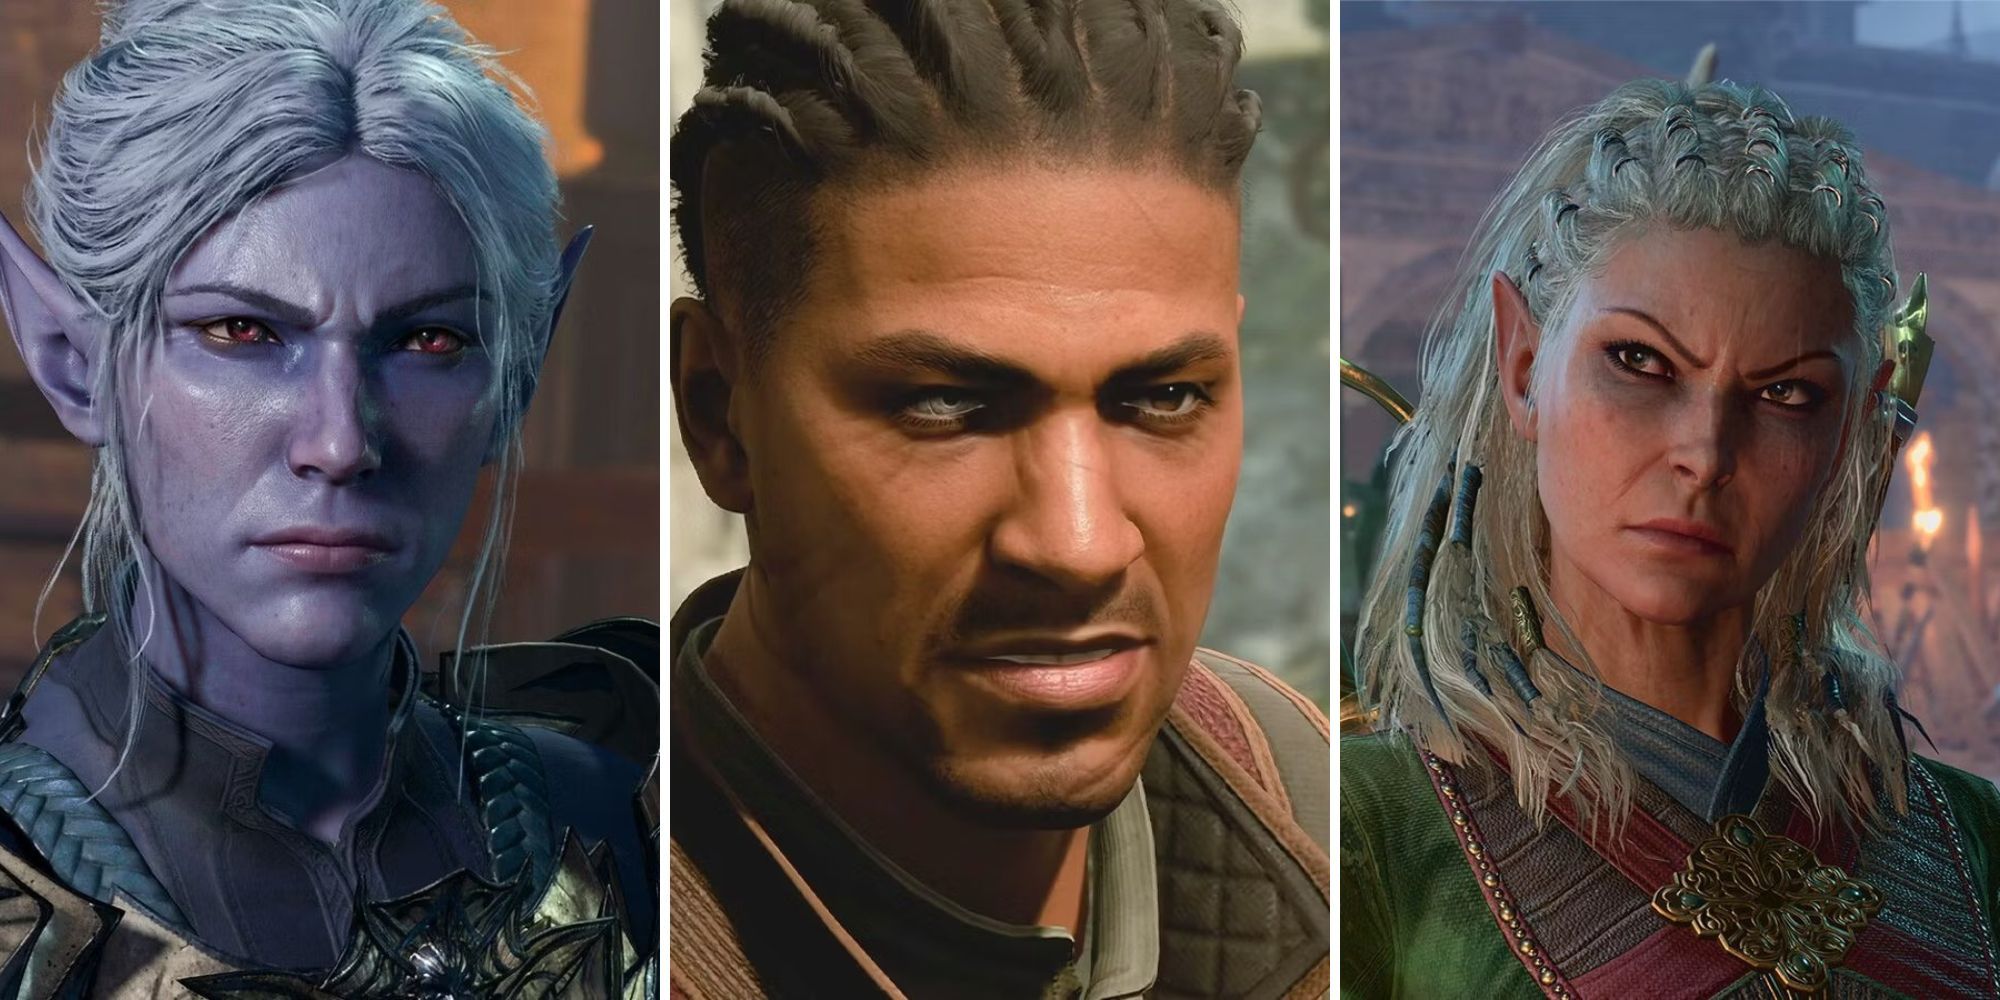 A grid showing the companions Minthara, Wyll, and Jaheira in Baldur’s Gate 3